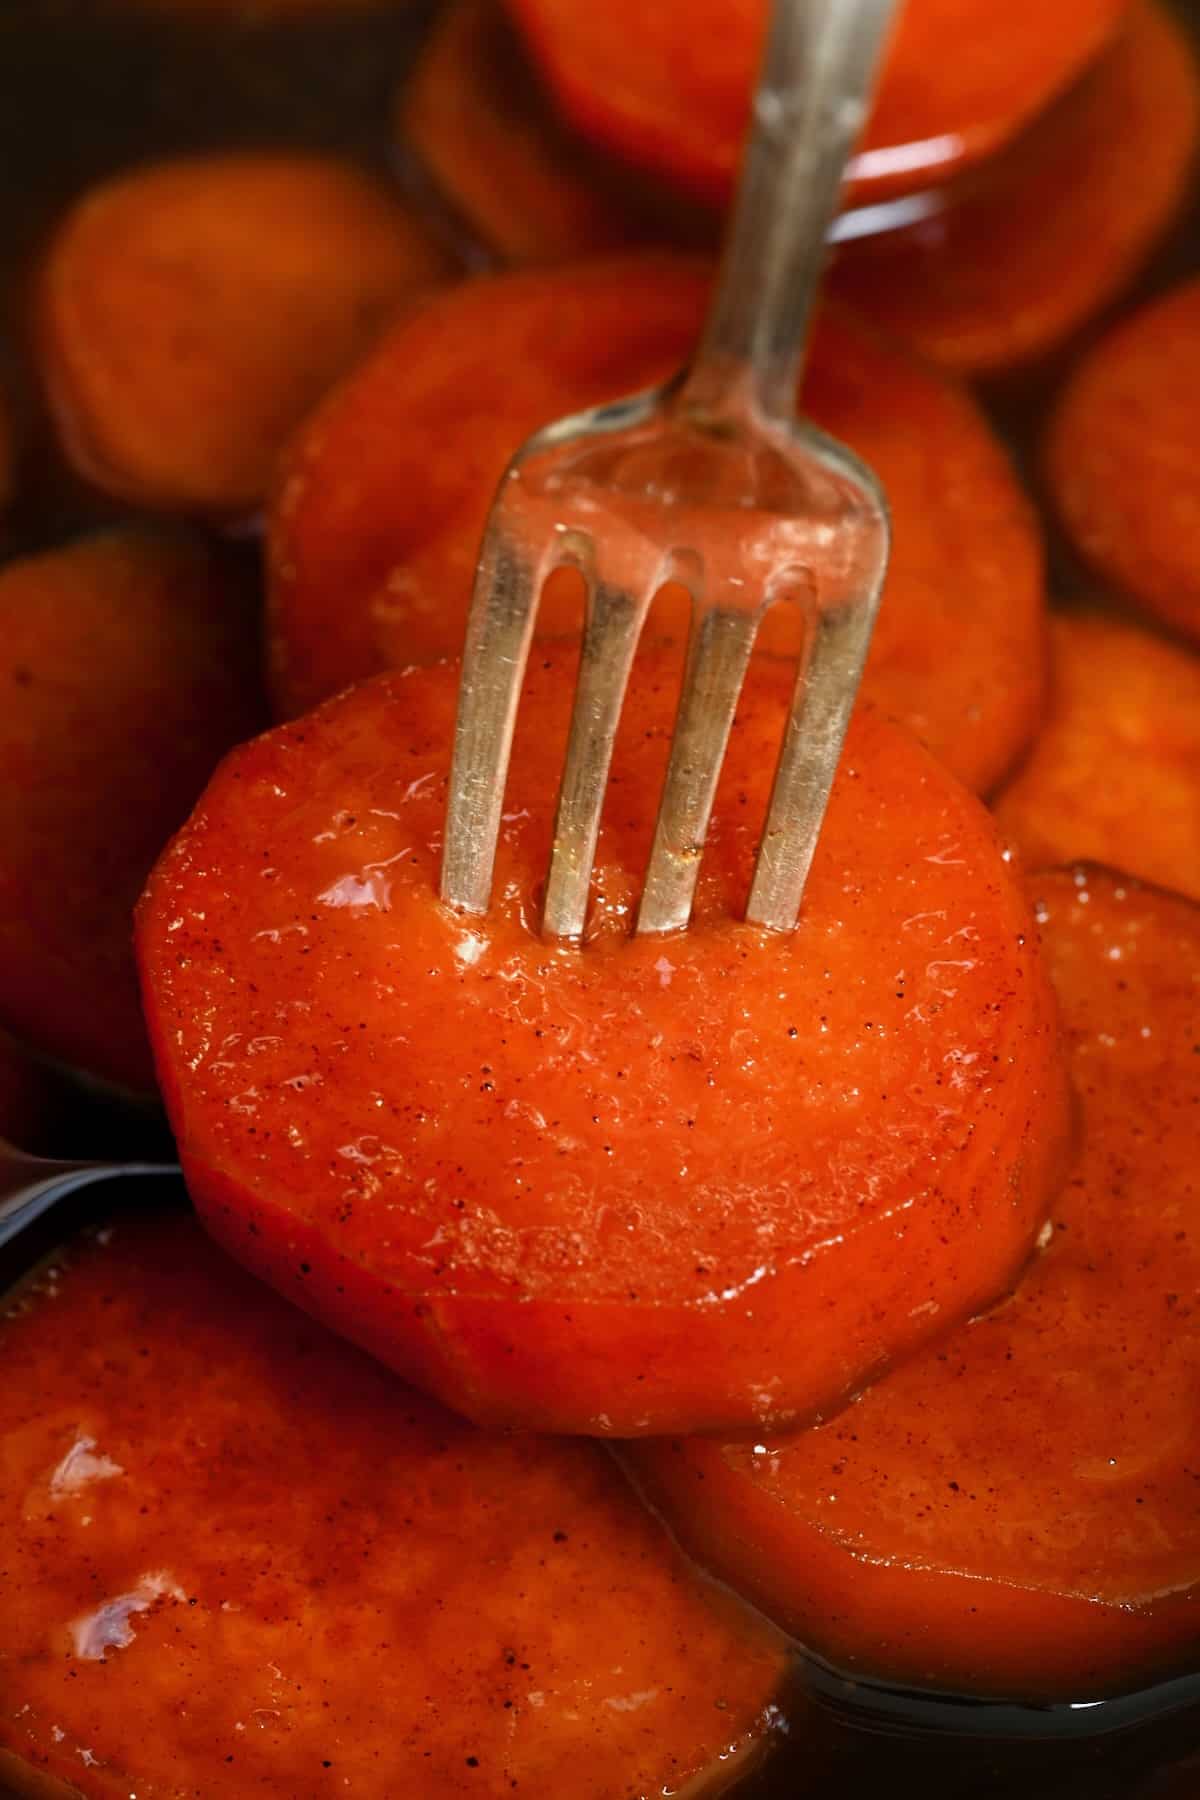 Candied yam on a fork